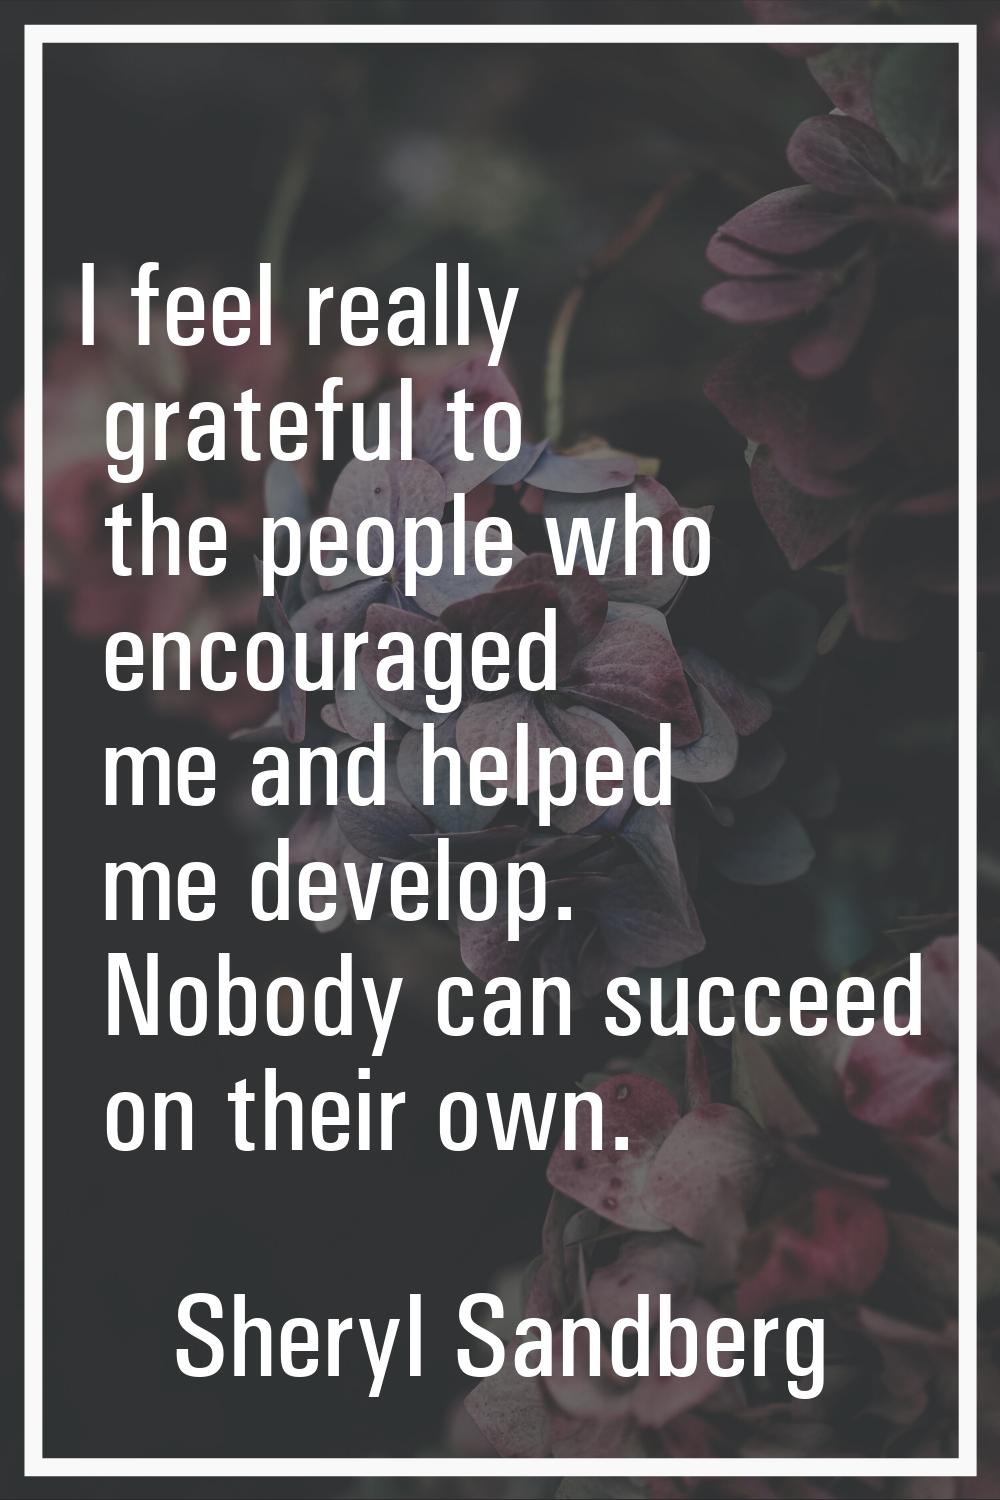 I feel really grateful to the people who encouraged me and helped me develop. Nobody can succeed on